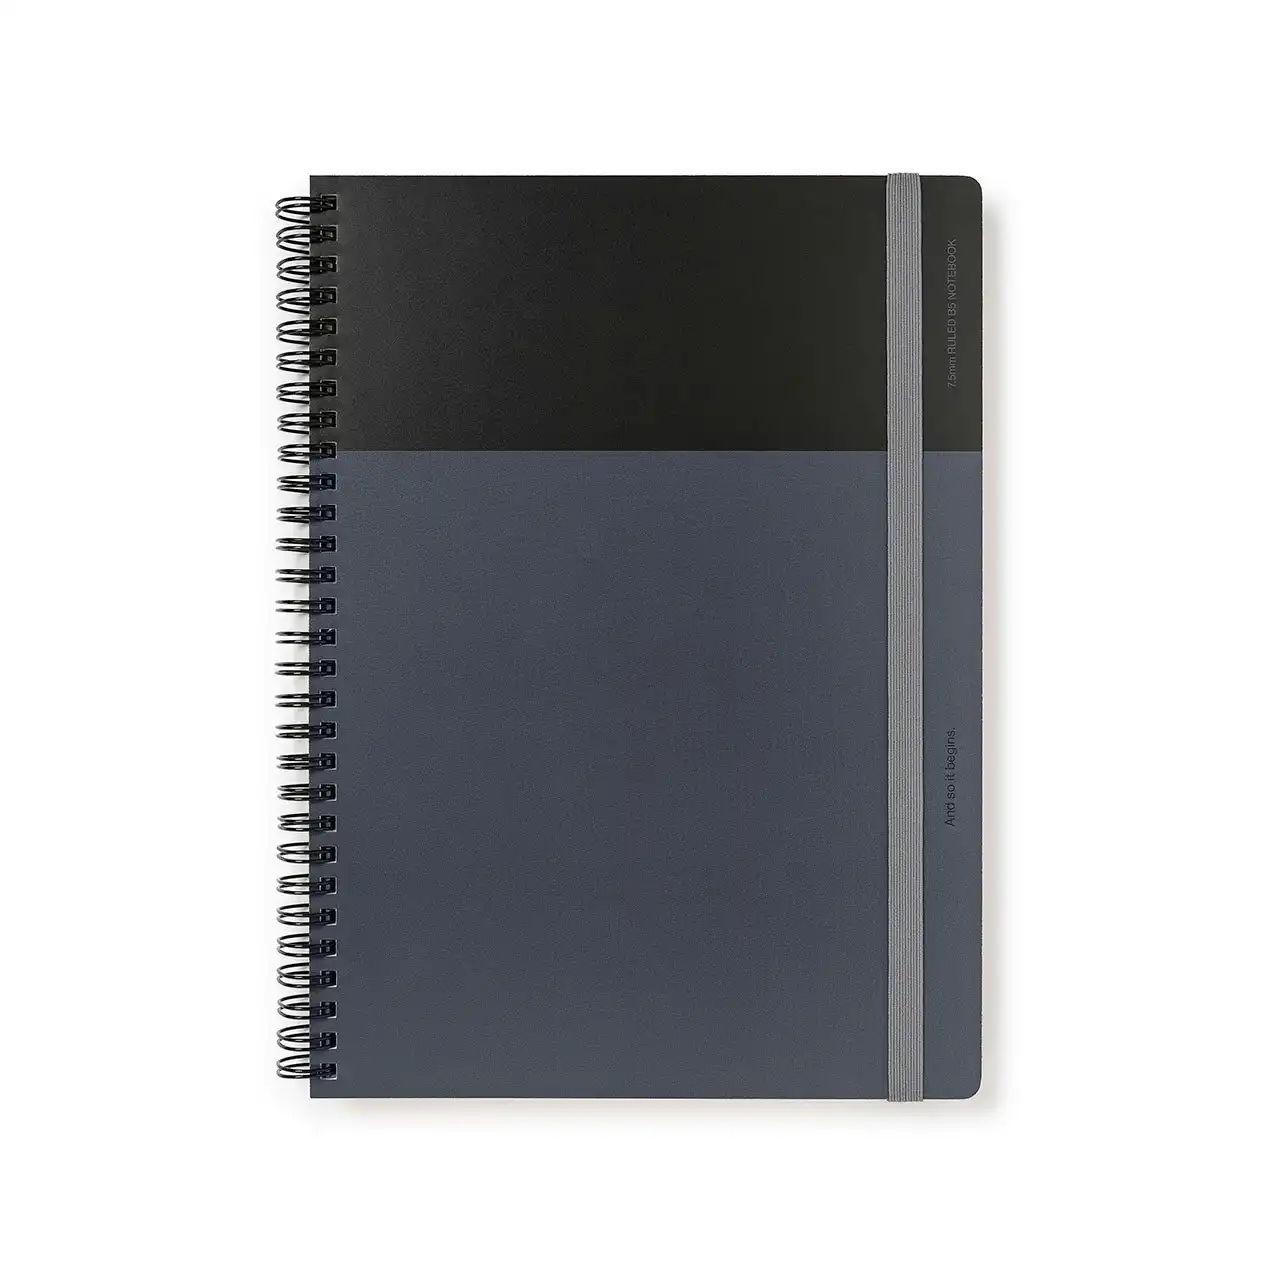 Any Day Now Dot Grid B5 Ruled Notebook 80gsm Paper Journal Diary 192 Pages Black